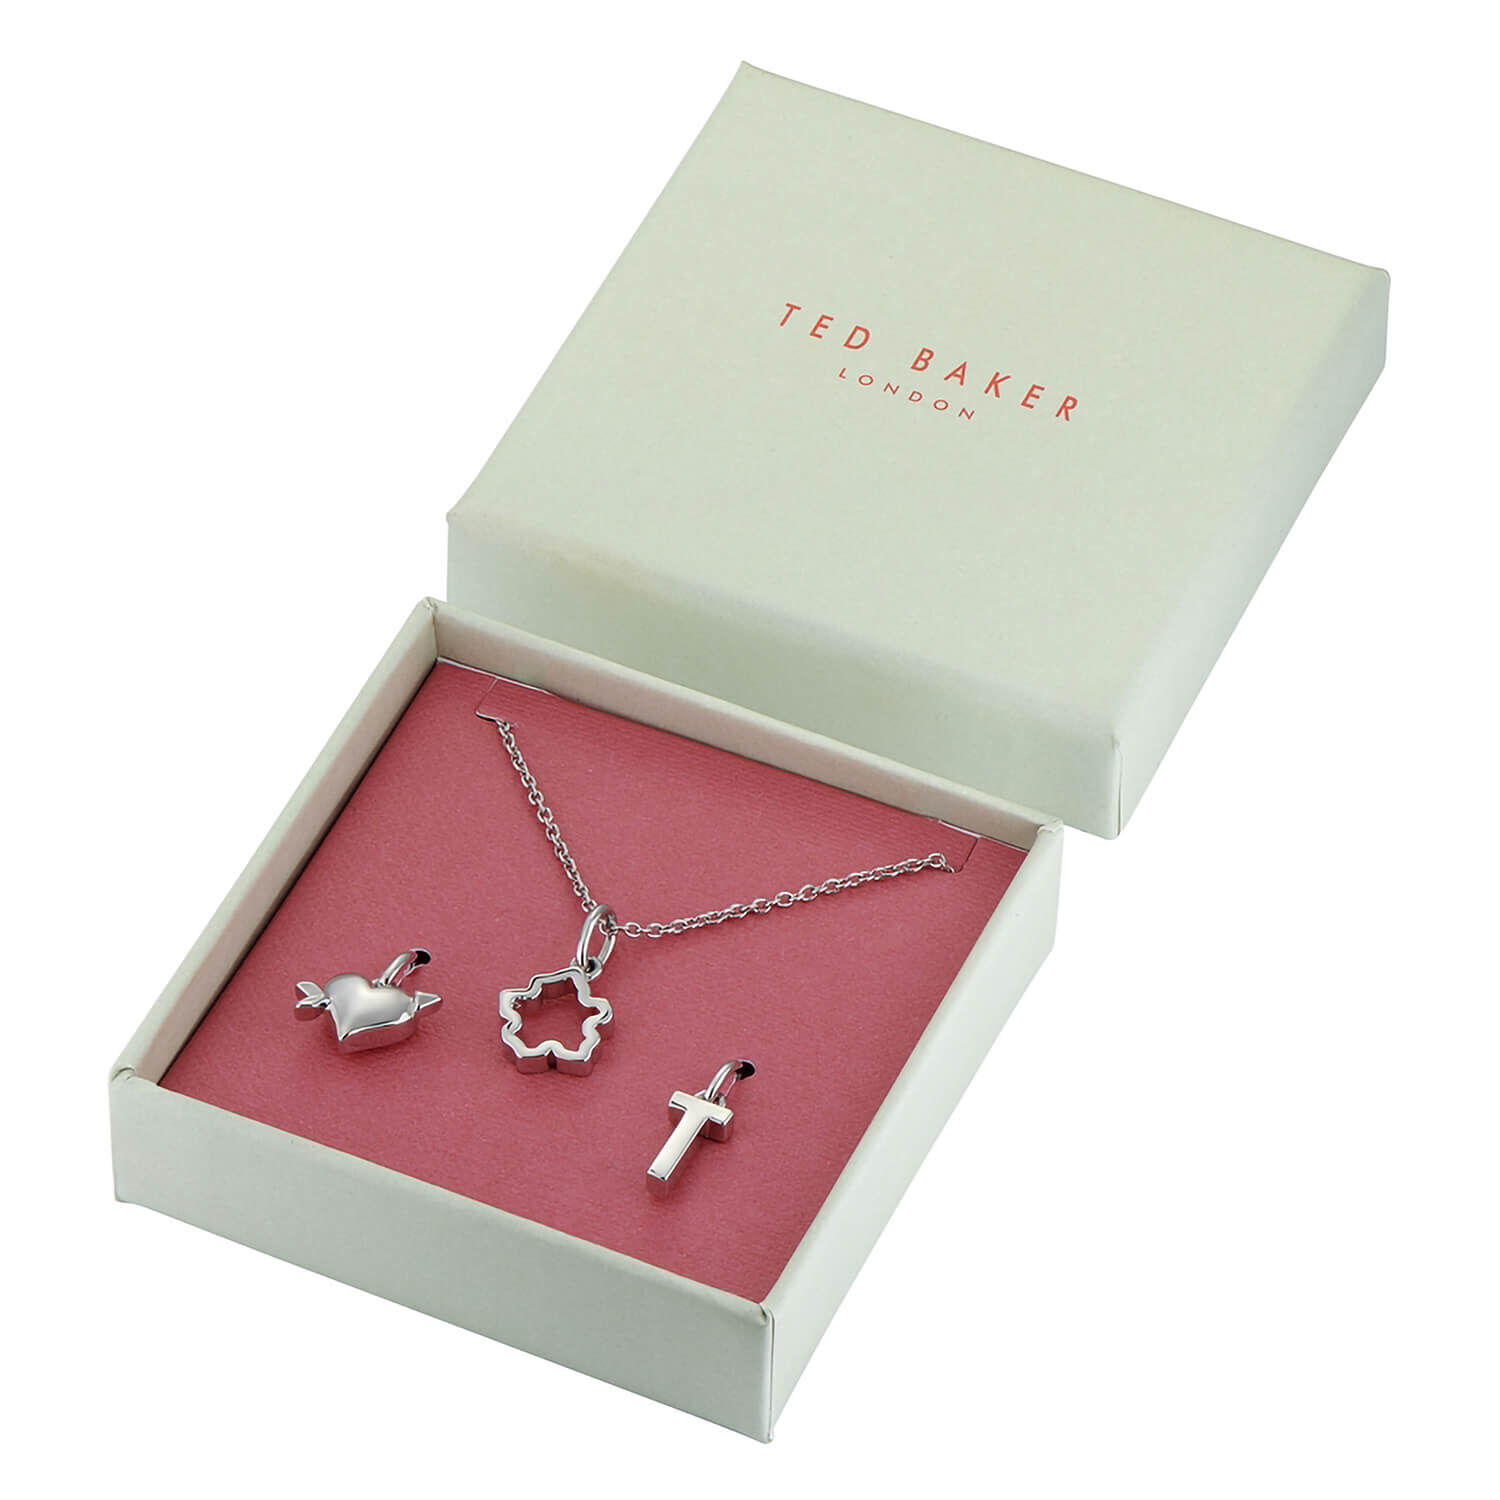 Ted Baker Jewellery | Pearli pearly heart pendant in silver | EQVVS Womens